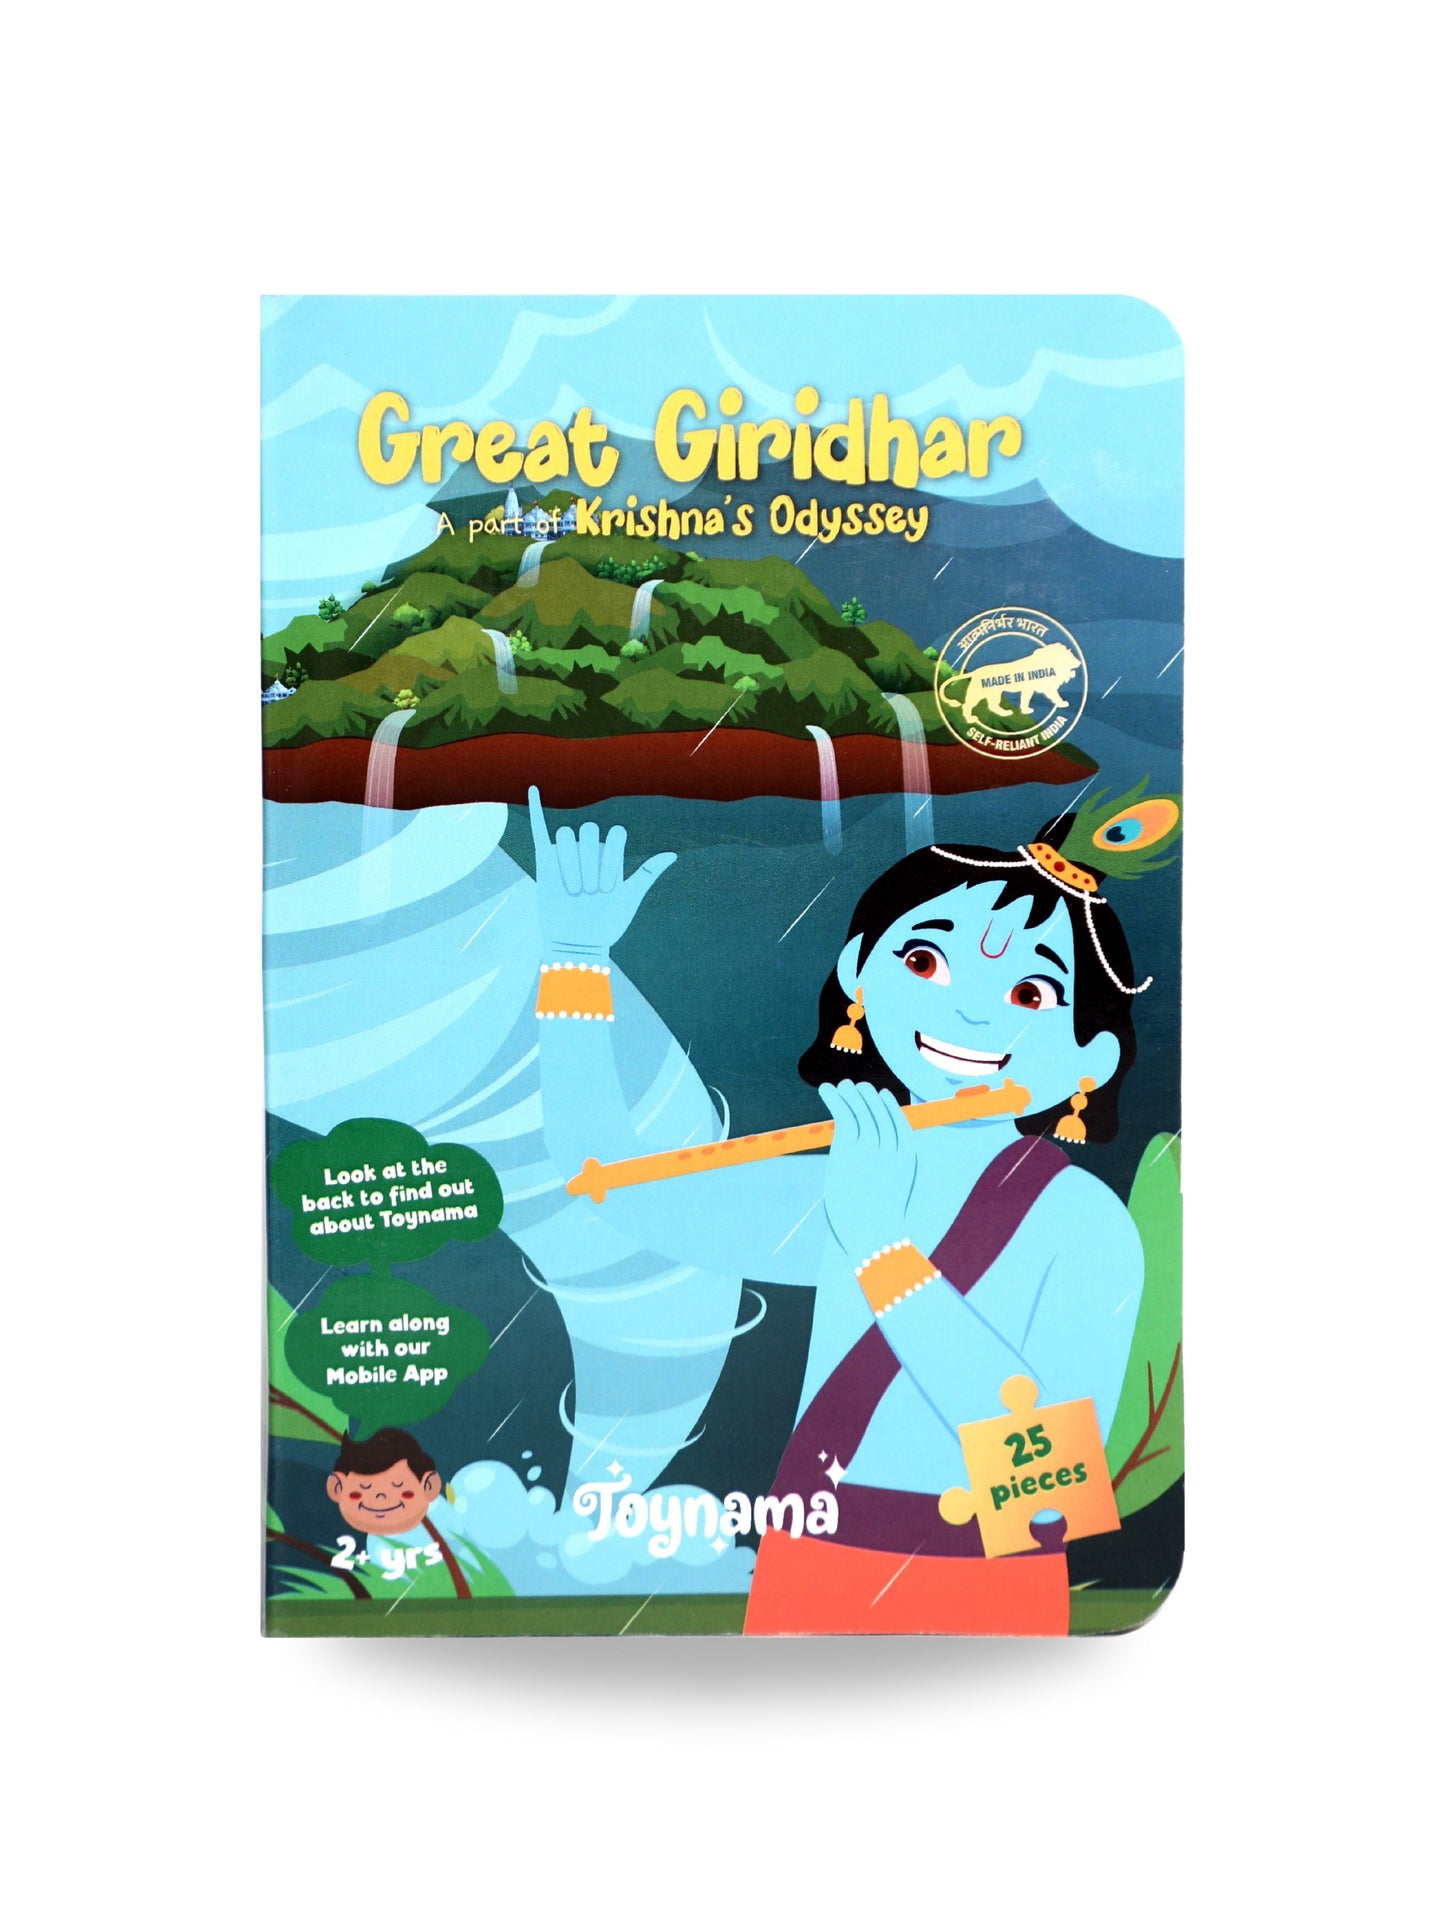 Great Giridhar 25 Pcs Jigsaw Puzzles Ages 2+